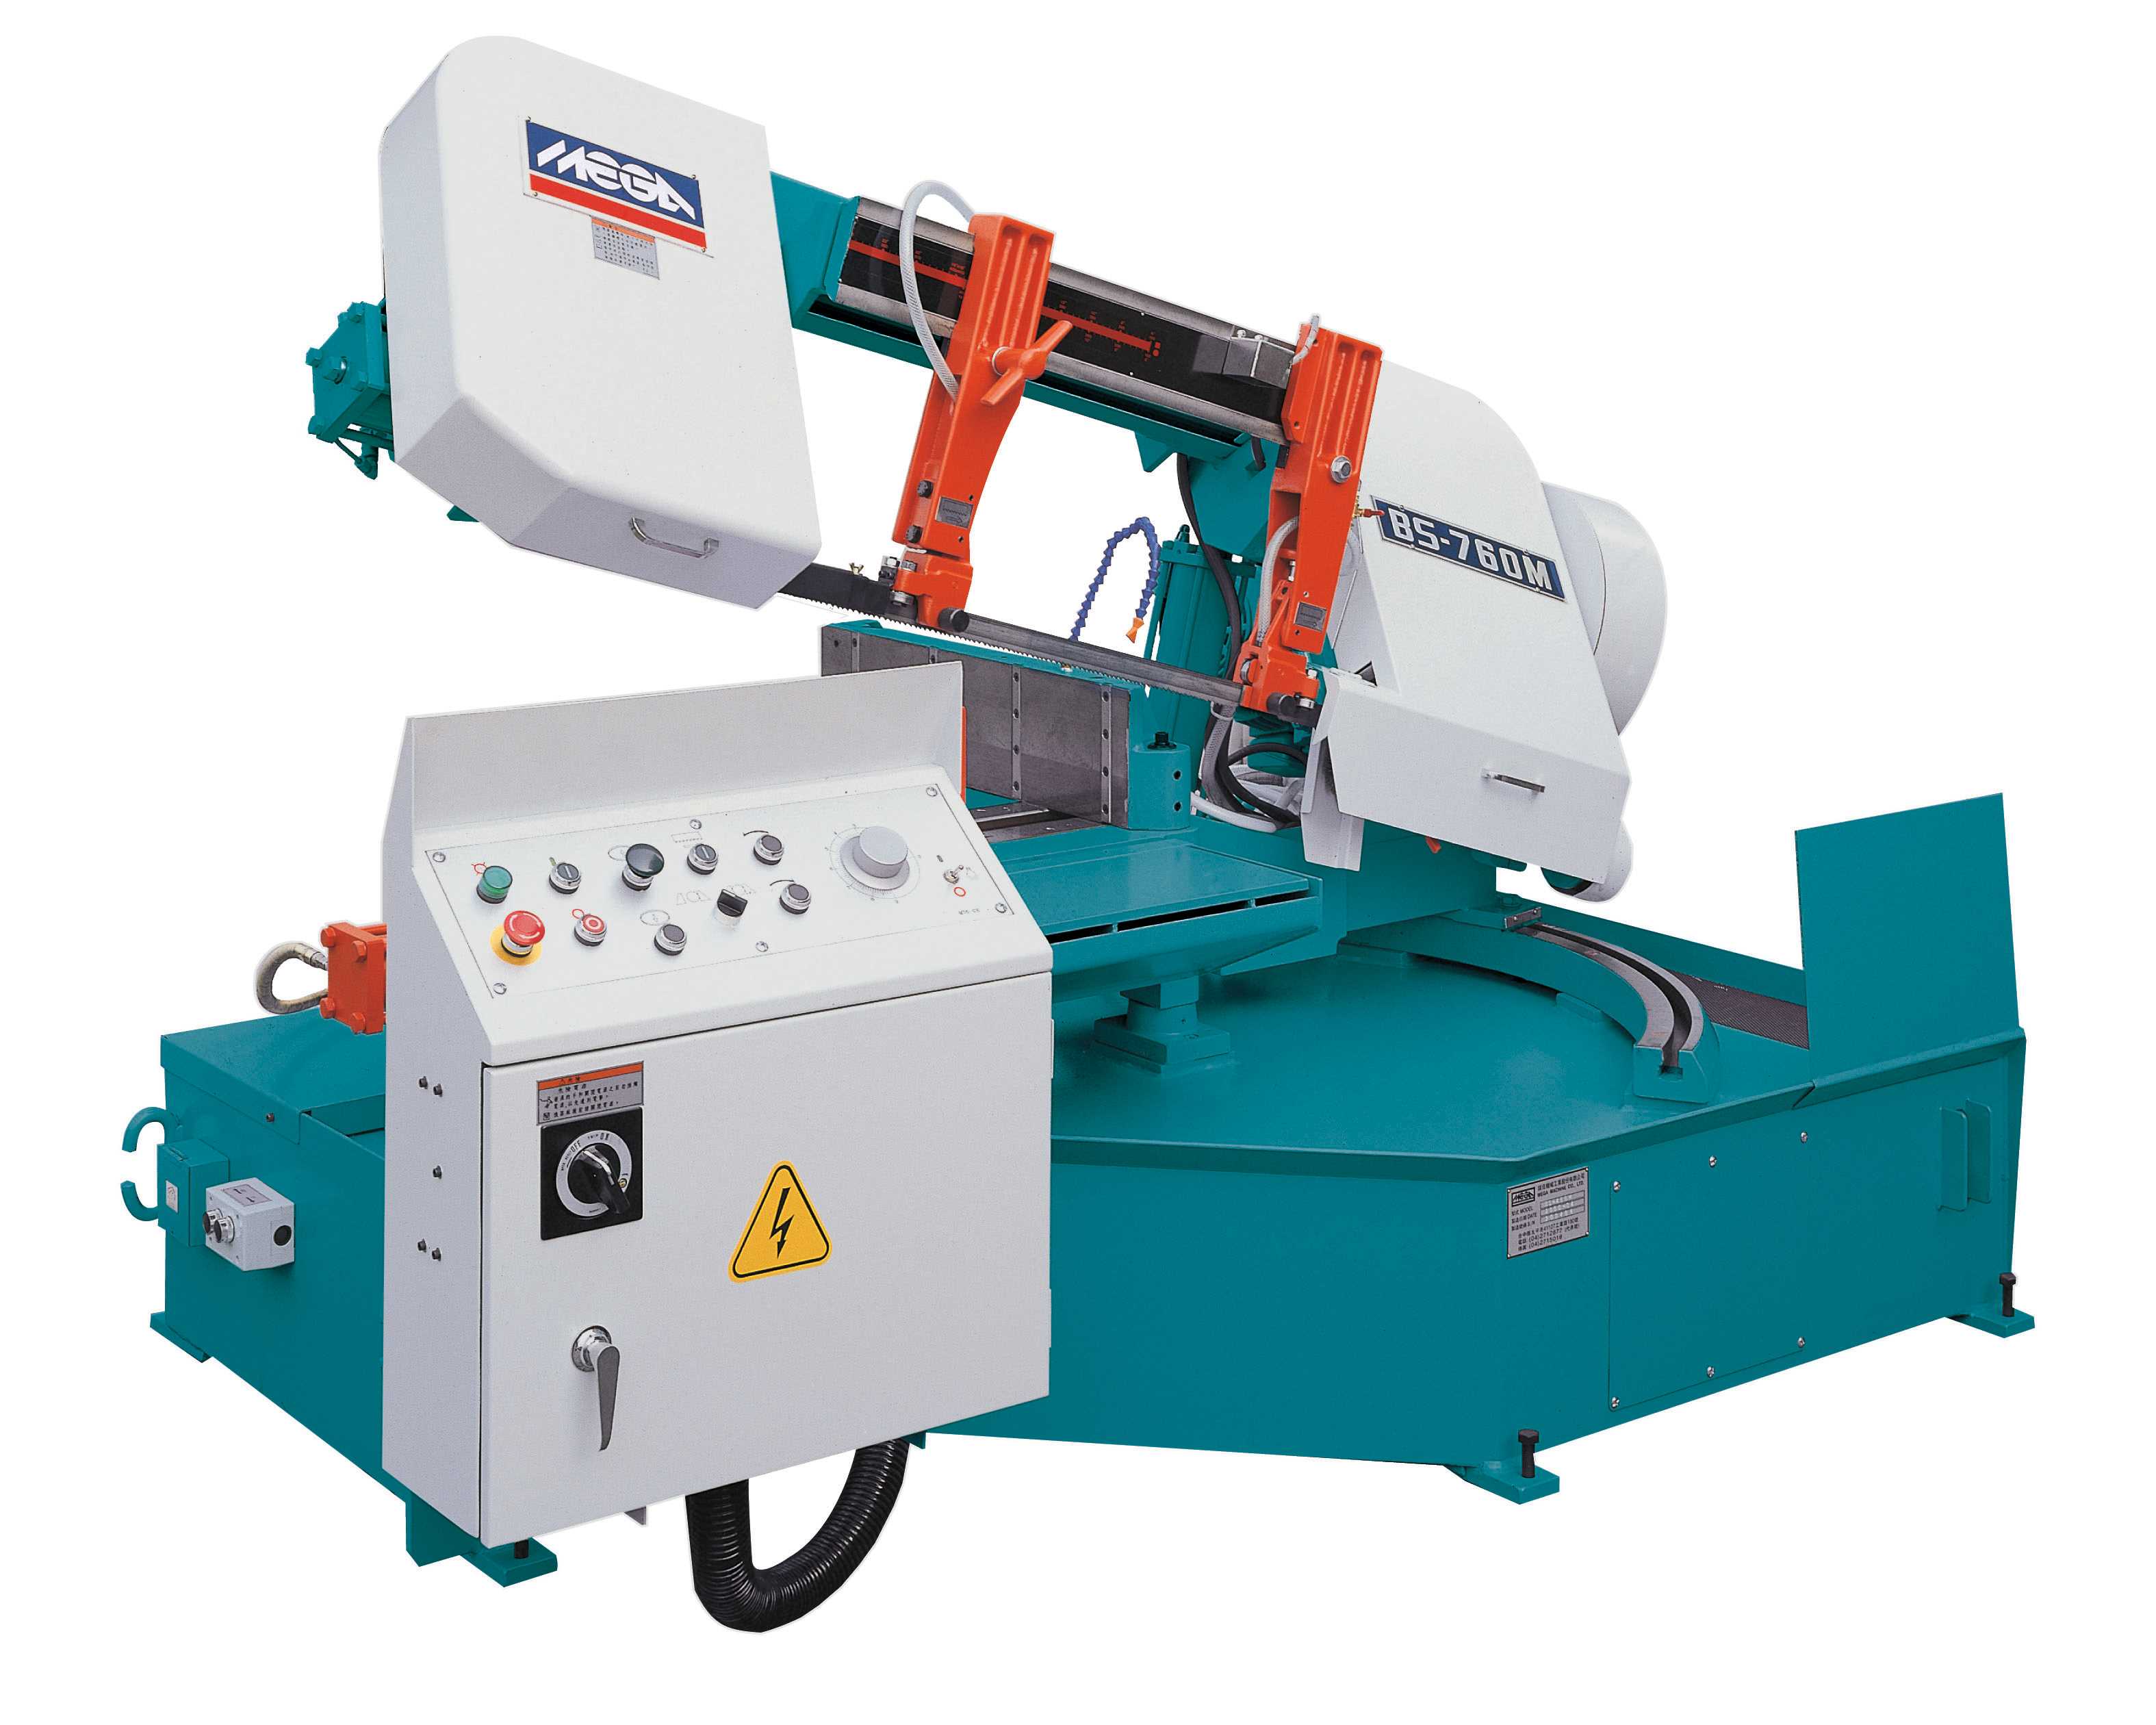 SEMI AUTOMATIC HORIZONTAL BANDSAWS (POWER TURNING TABLE MITRE CUTTING)-BS-760M